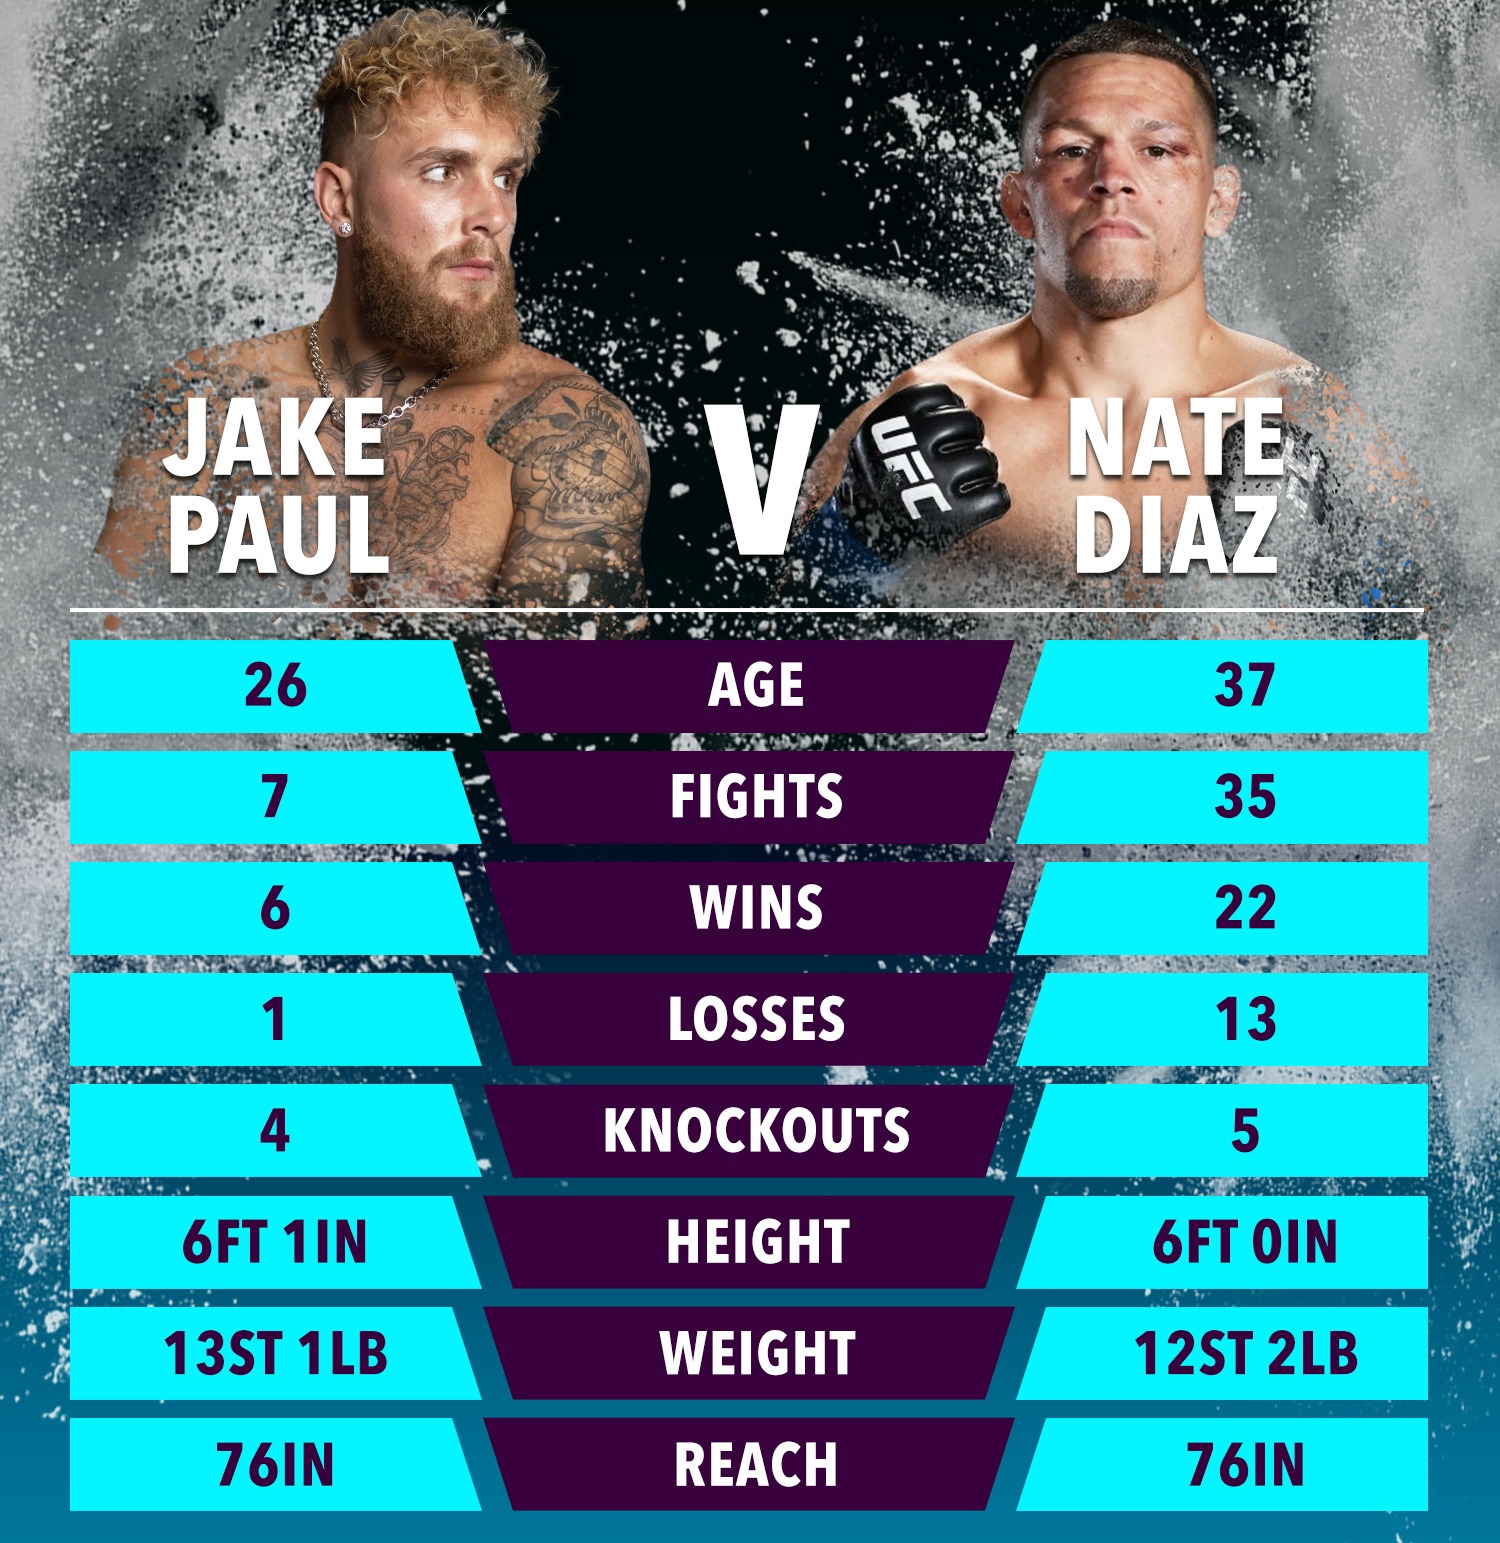 , Jake Paul claims next fight will be with Conor McGregor as YouTuber describes bout with UFC legend as ‘inevitable’